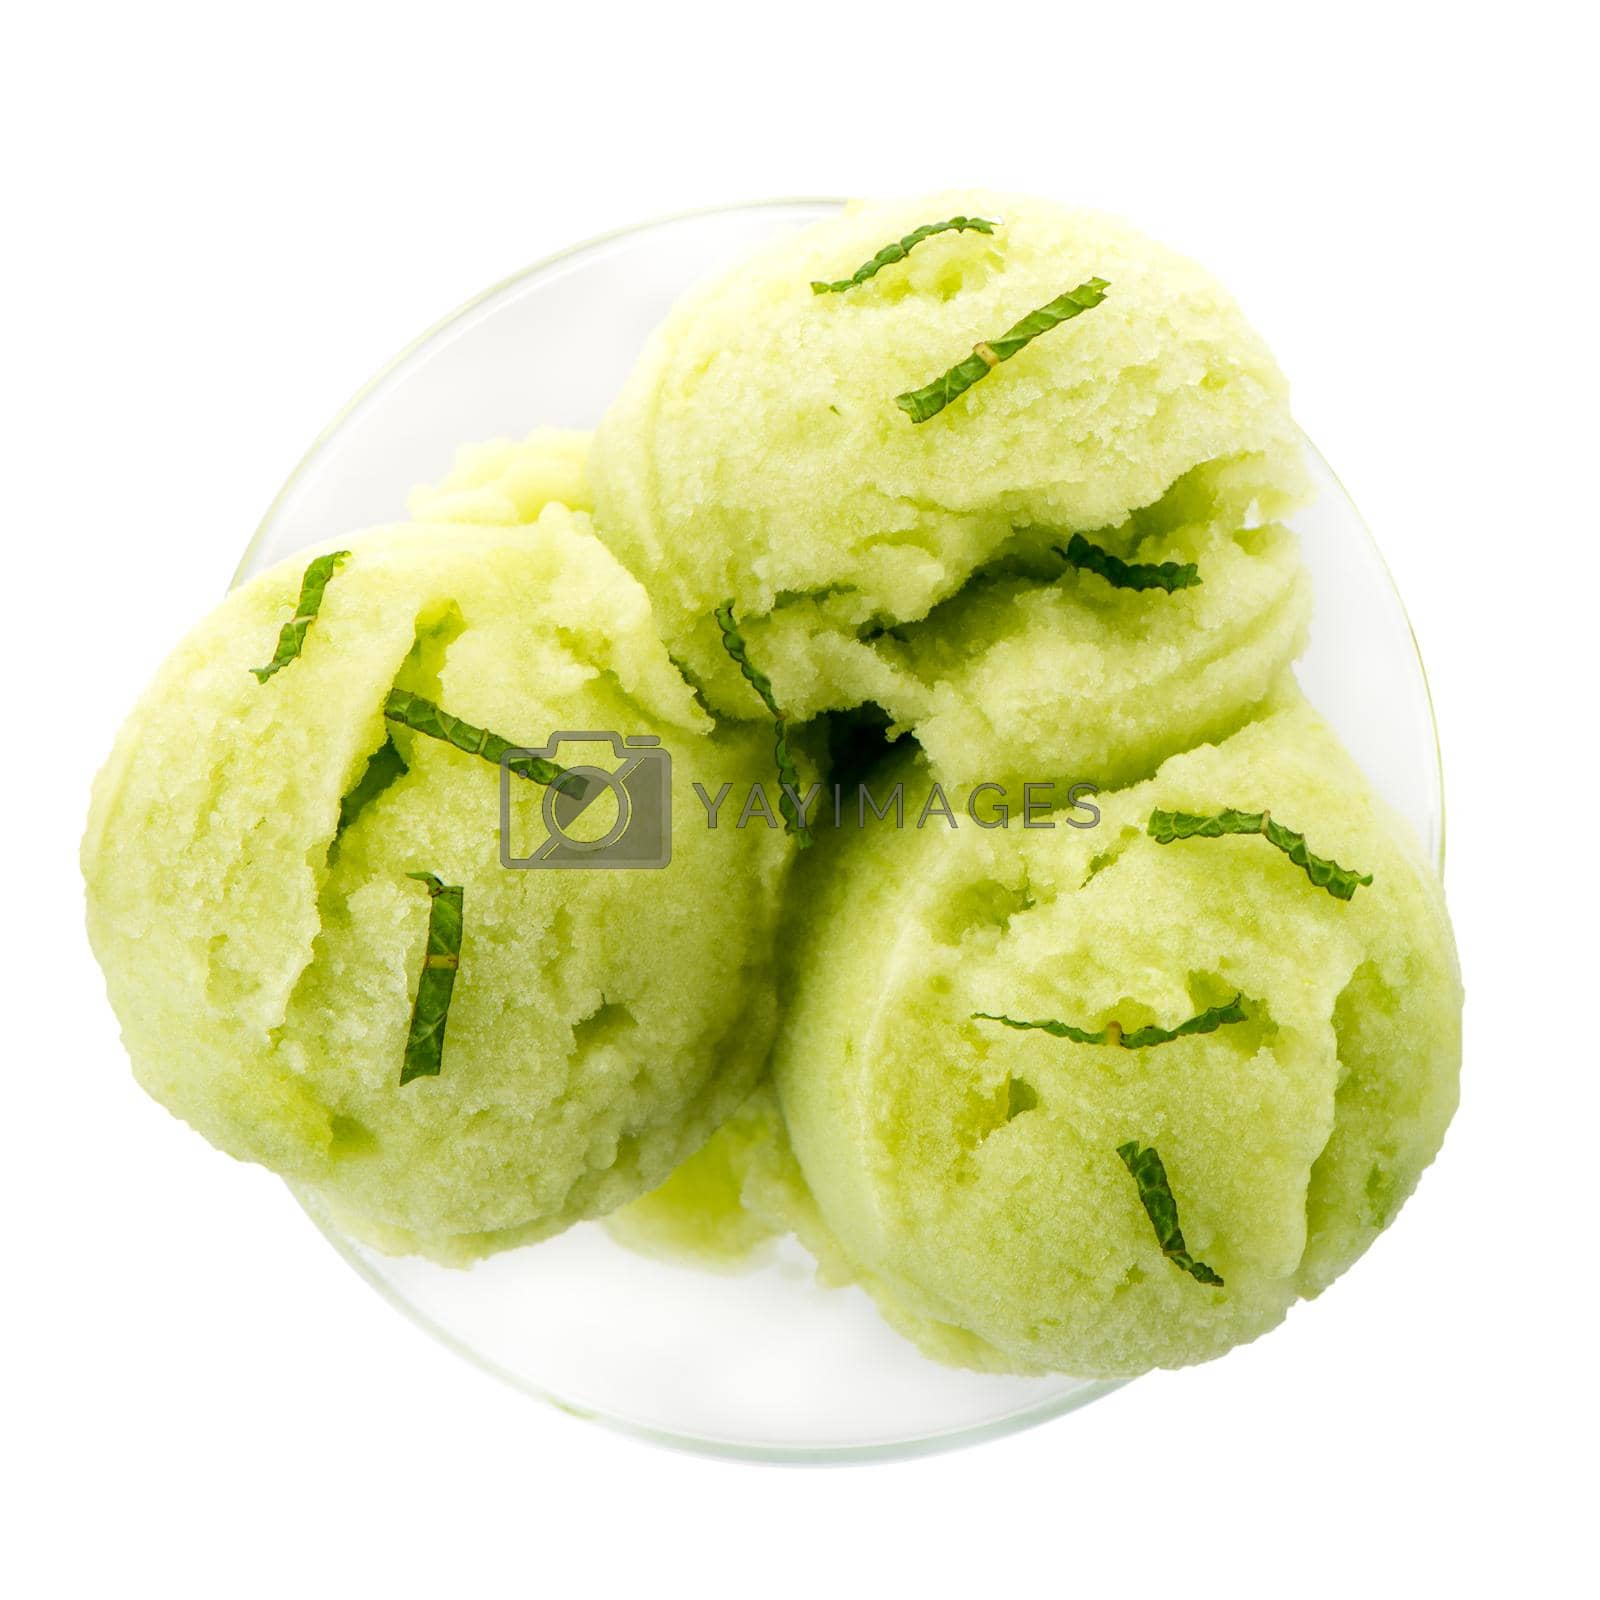 Royalty free image of Melon flavored ice-cream by homydesign